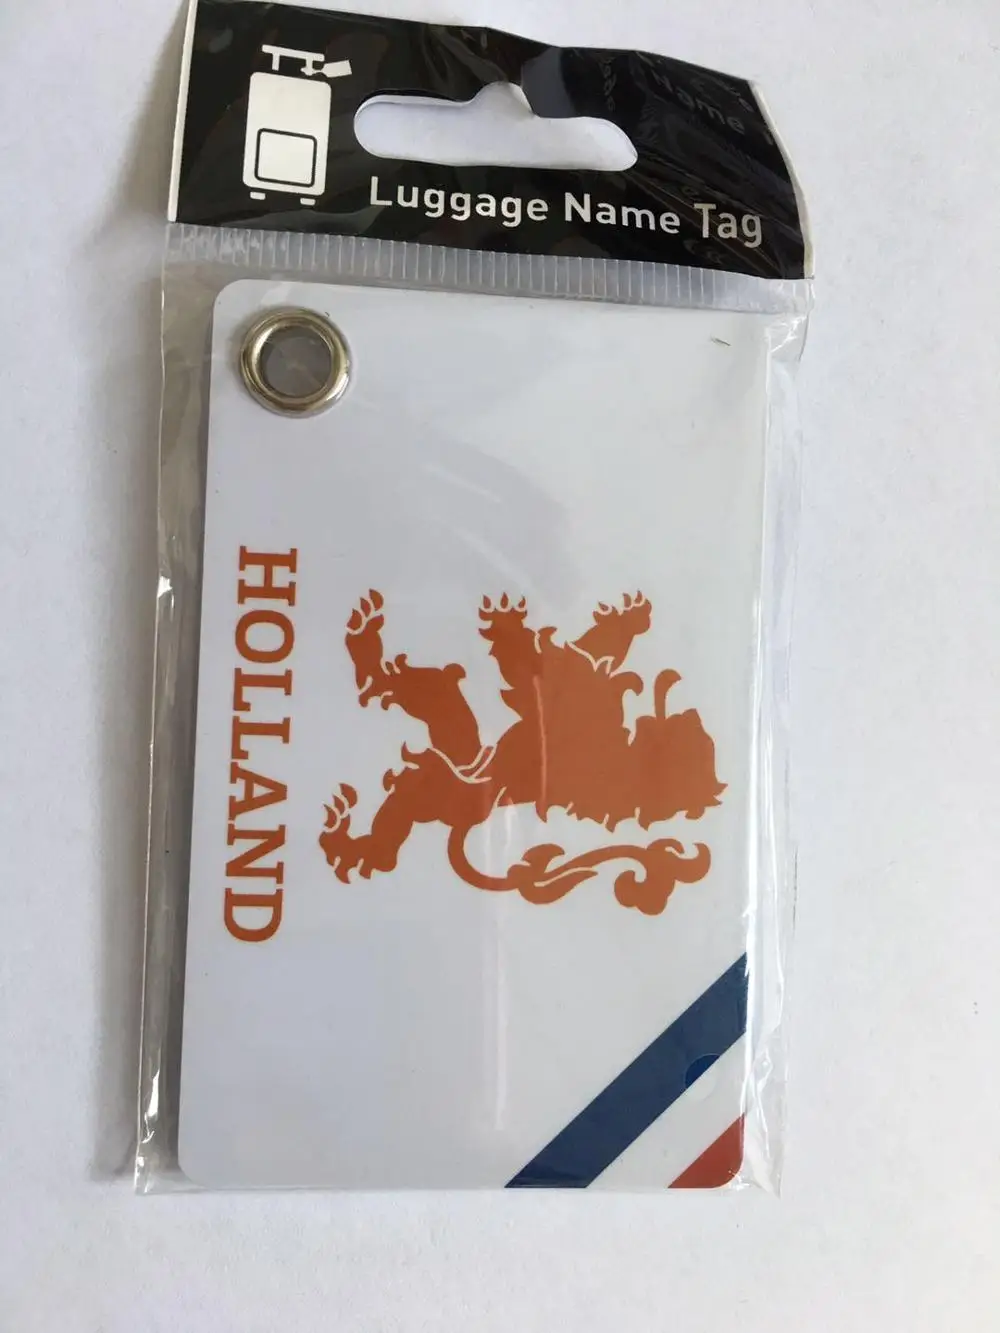 pvc material suitcase shaped world map travel luggage tag with logo